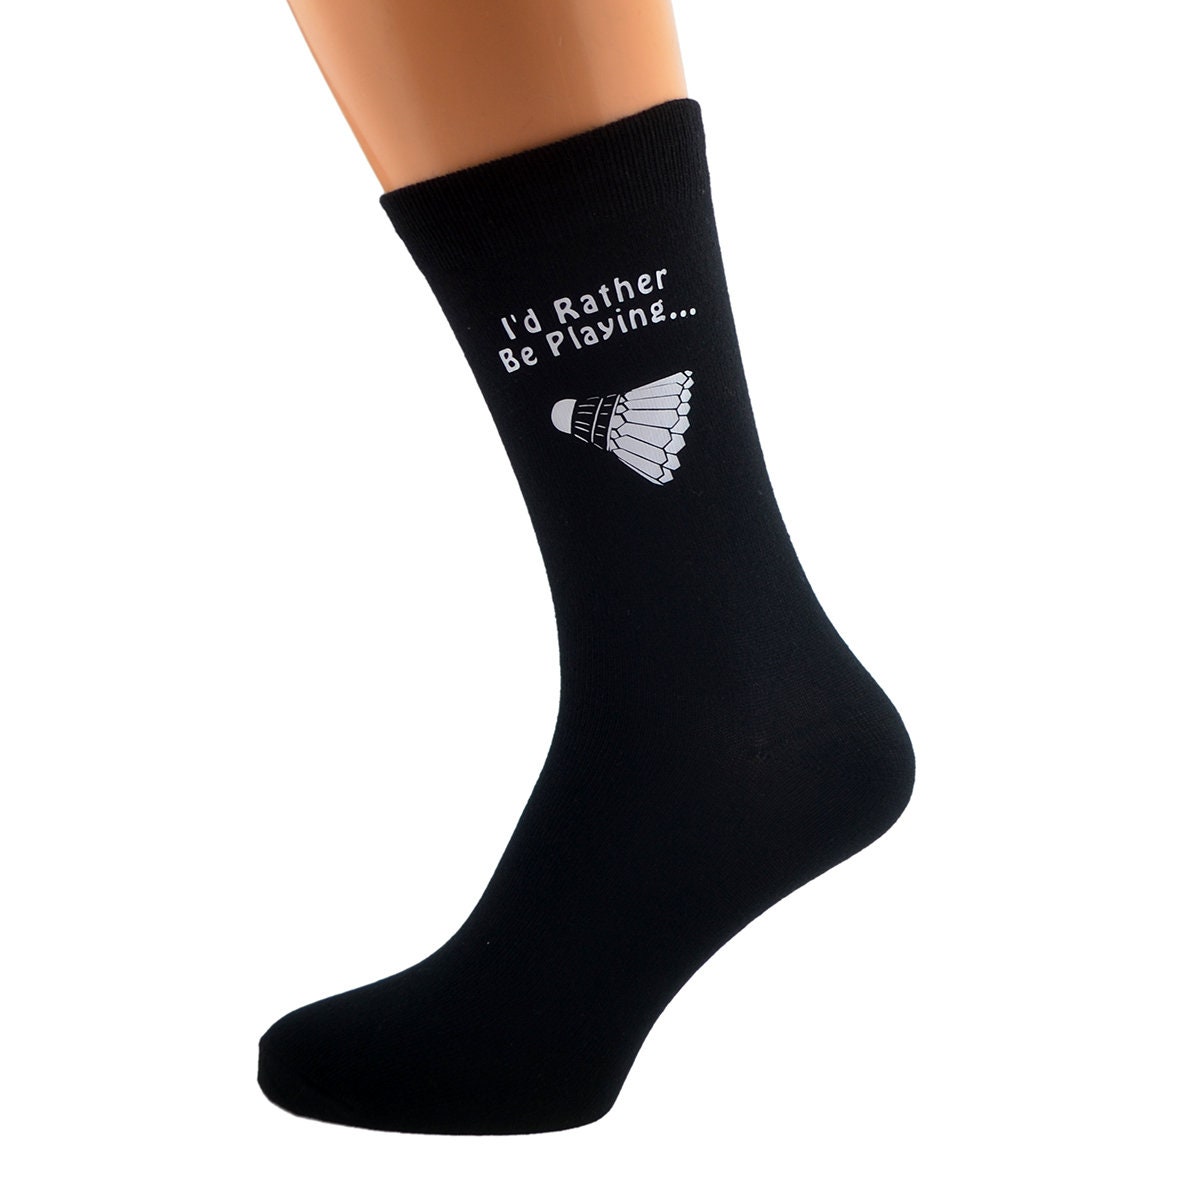 I’d Rather Be Playing Badminton With Shuttlecock Image Printed in White Vinyl On Mens Black Cotton Rich Socks Great. One Size, UK 8-12